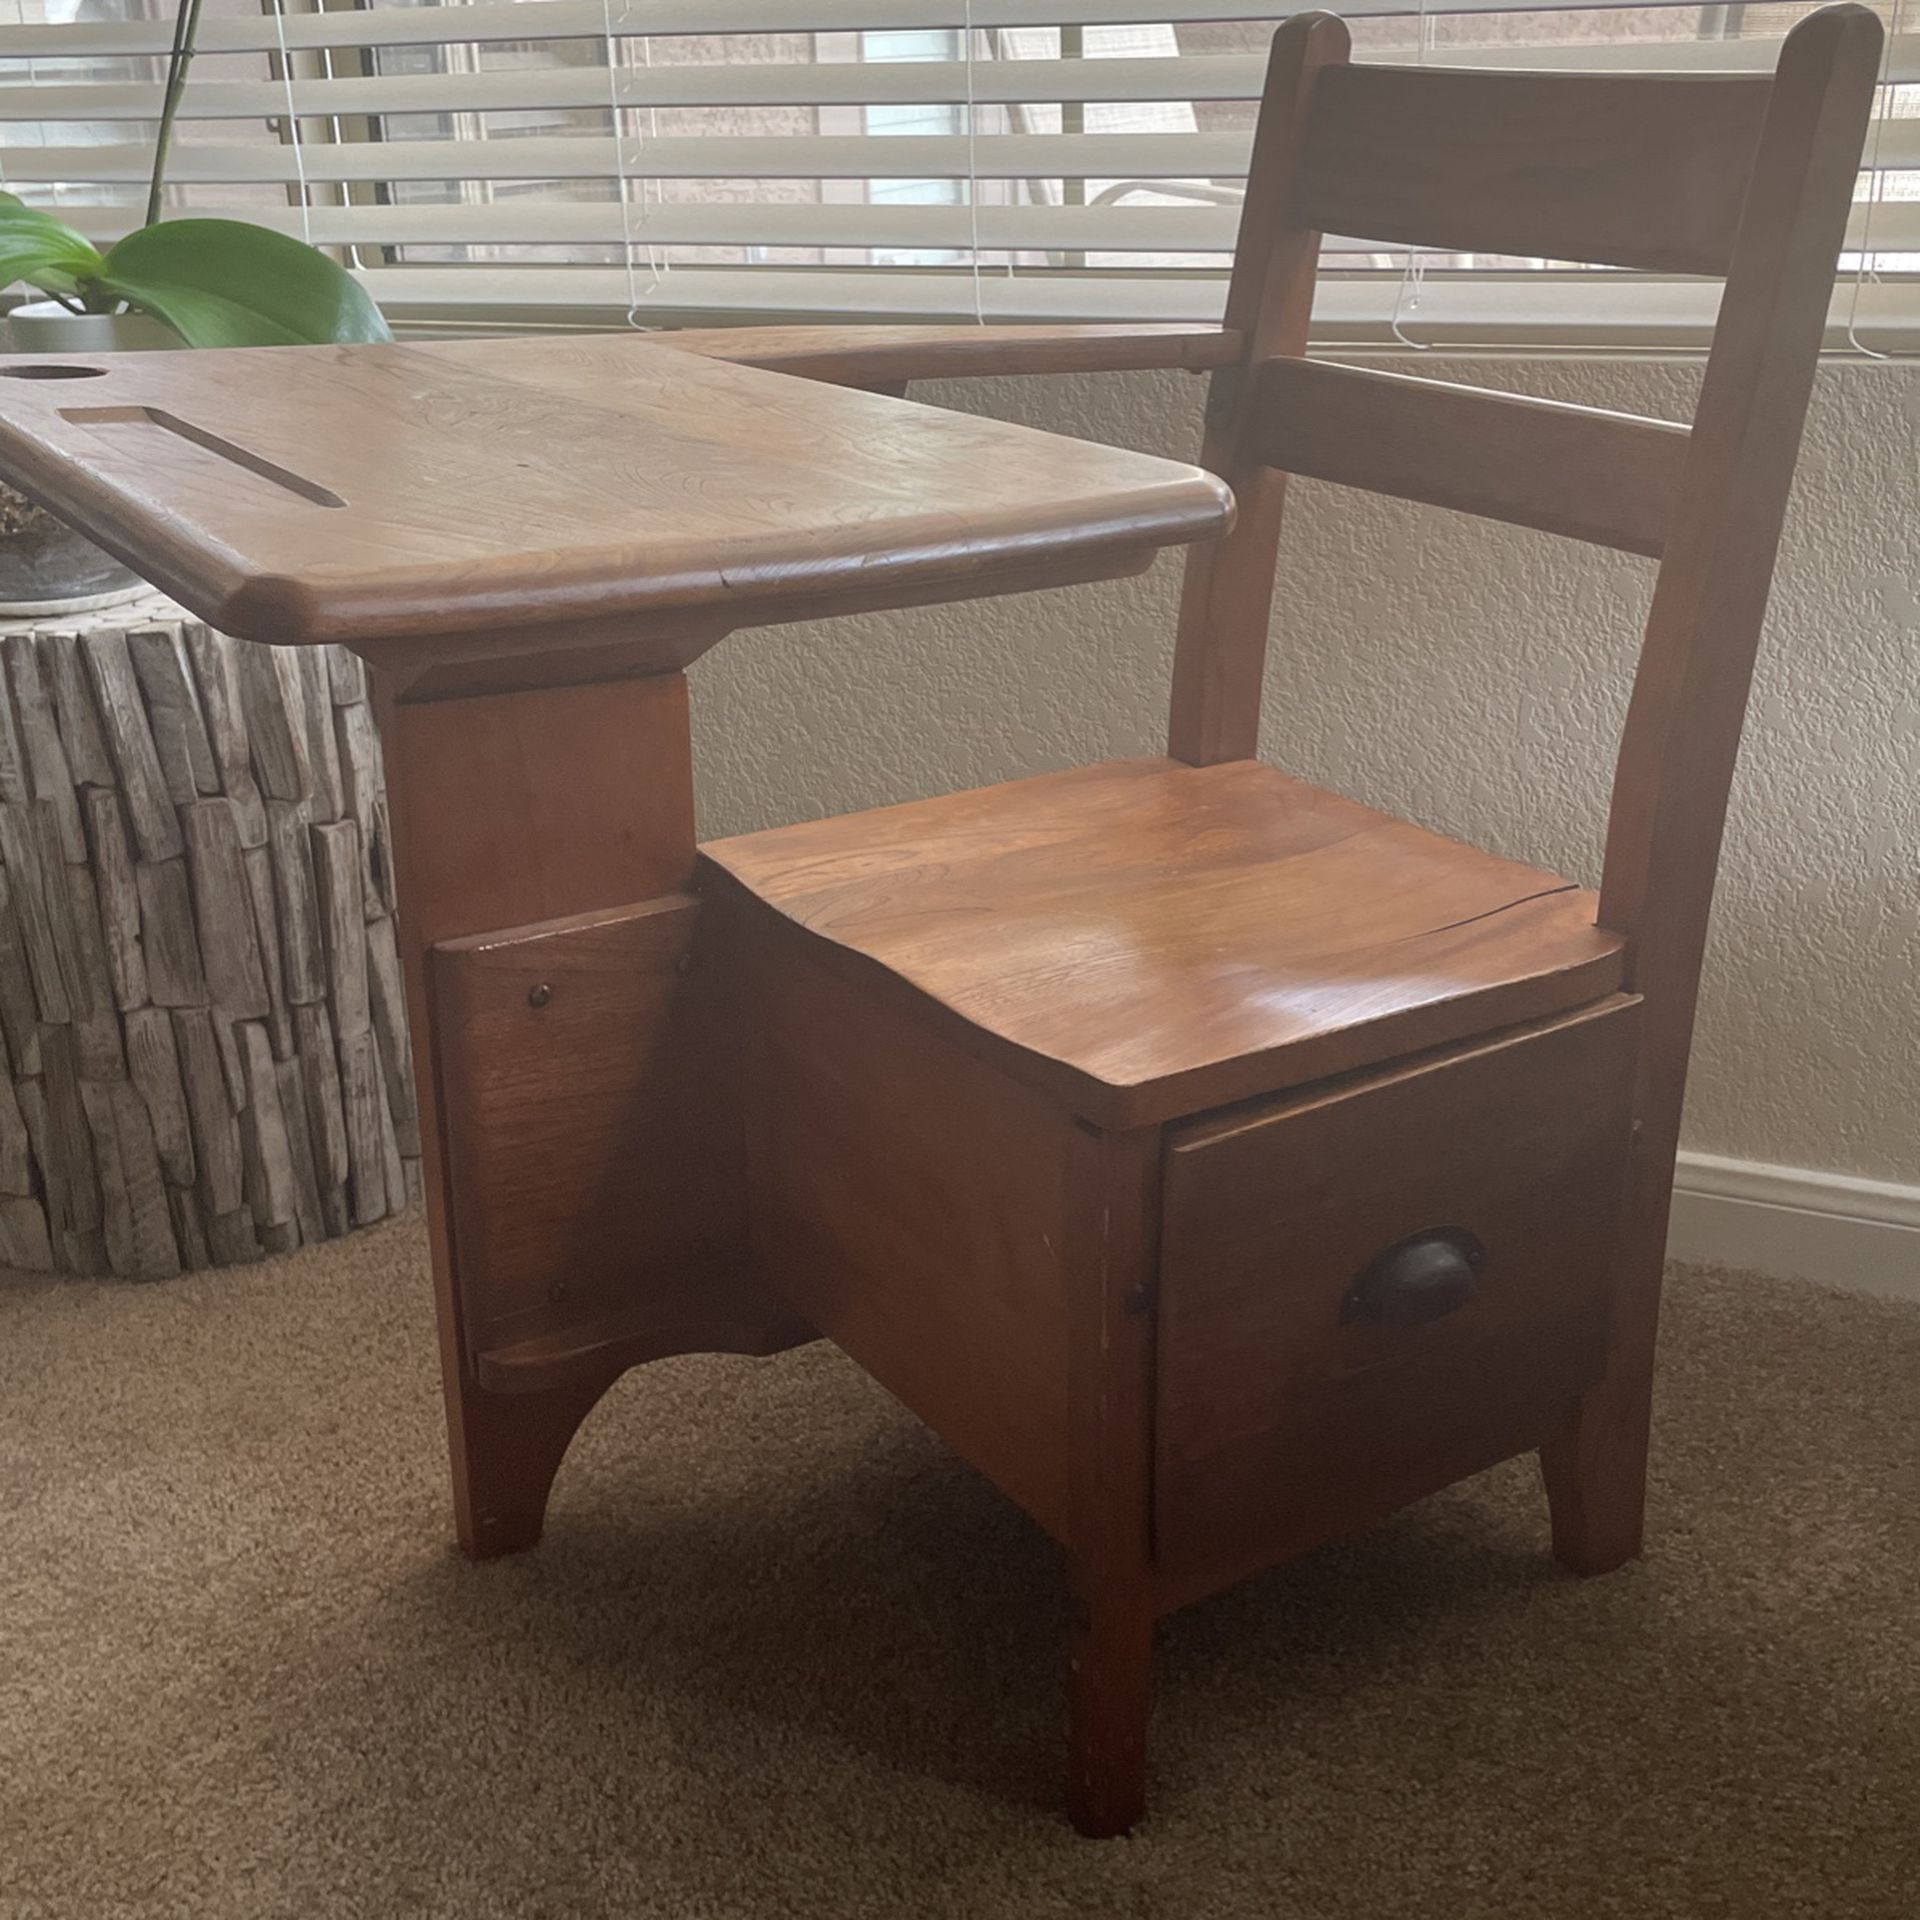 School Desk Vintage With Drawer(beautiful!) refinished